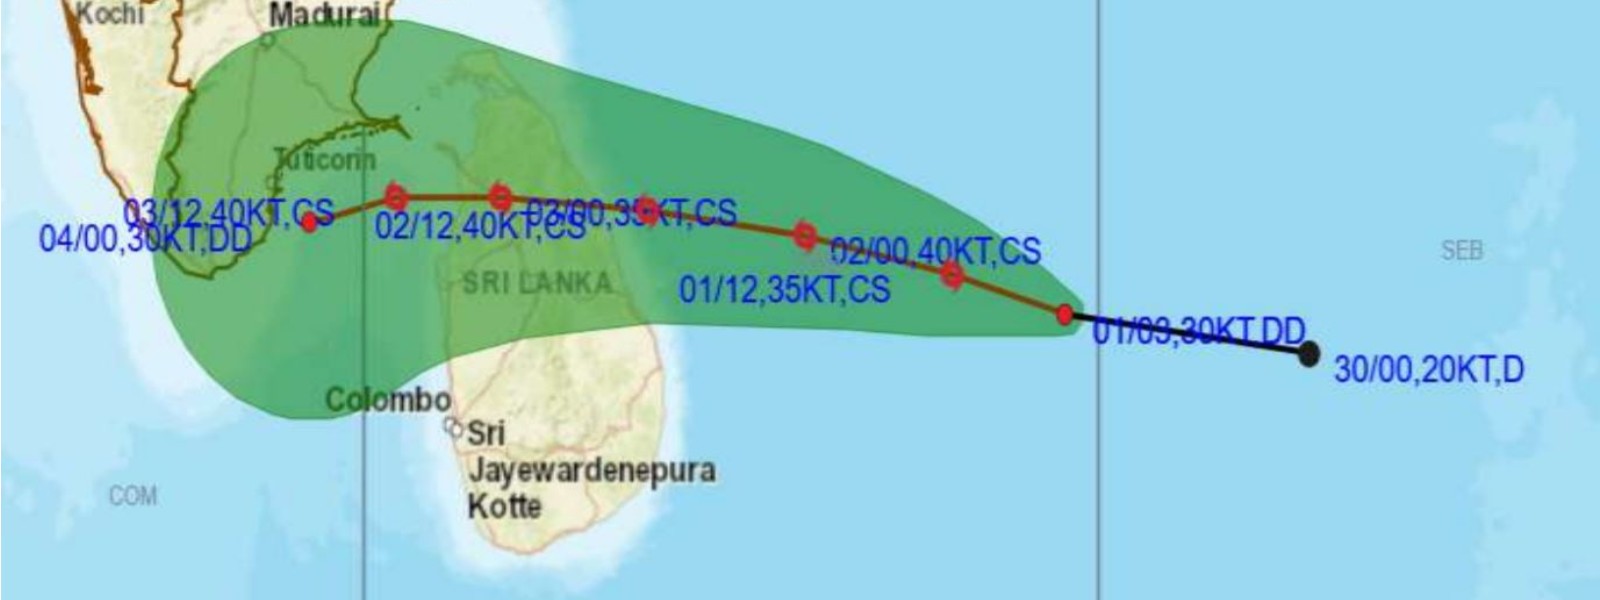 Strong winds expected as Cyclone Burevi to make landfall in SL